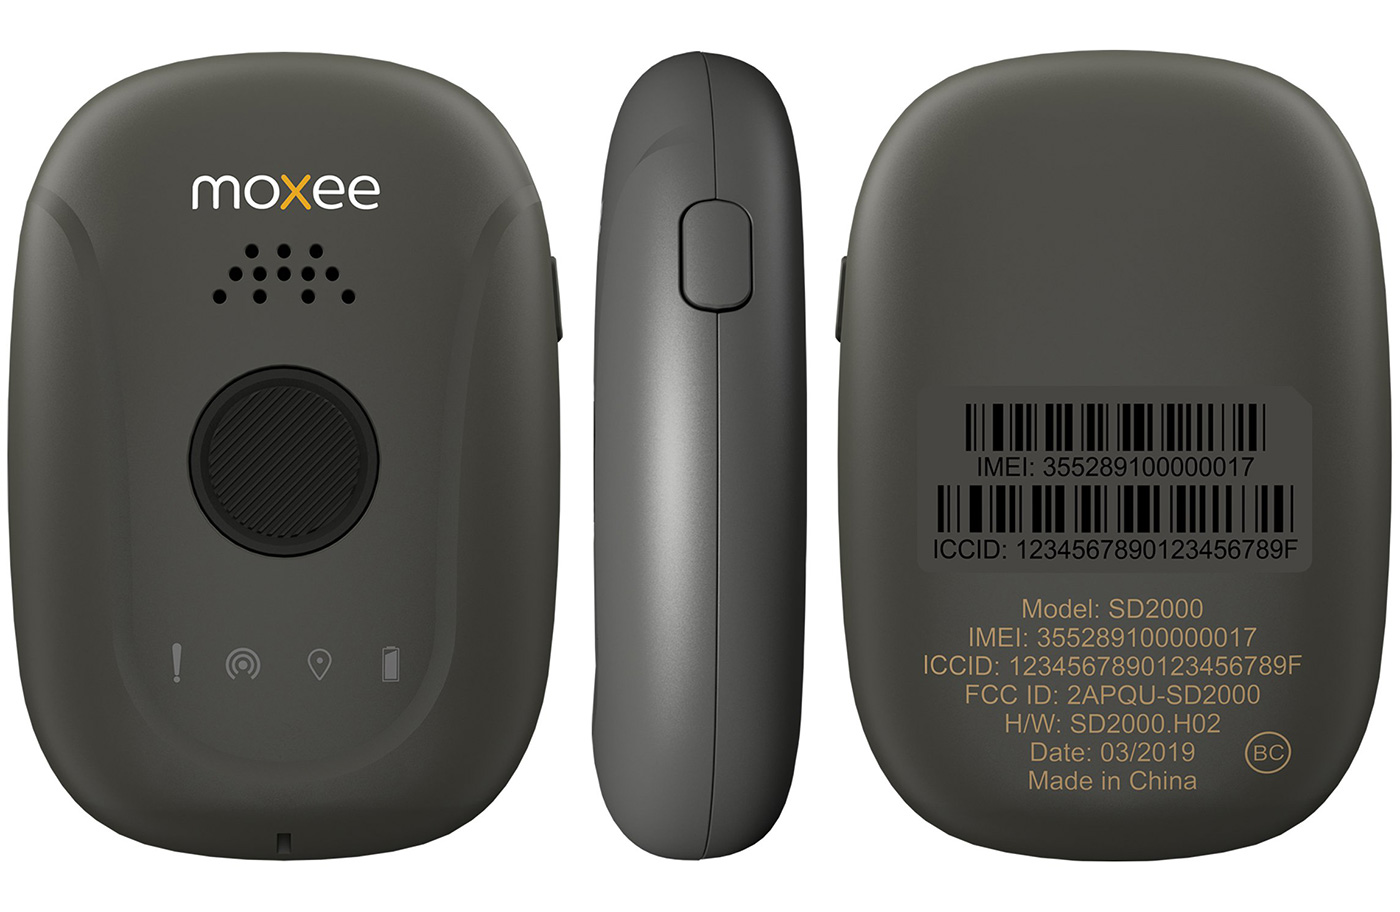 Moxee Signal personal safety device now available from T-Mobile